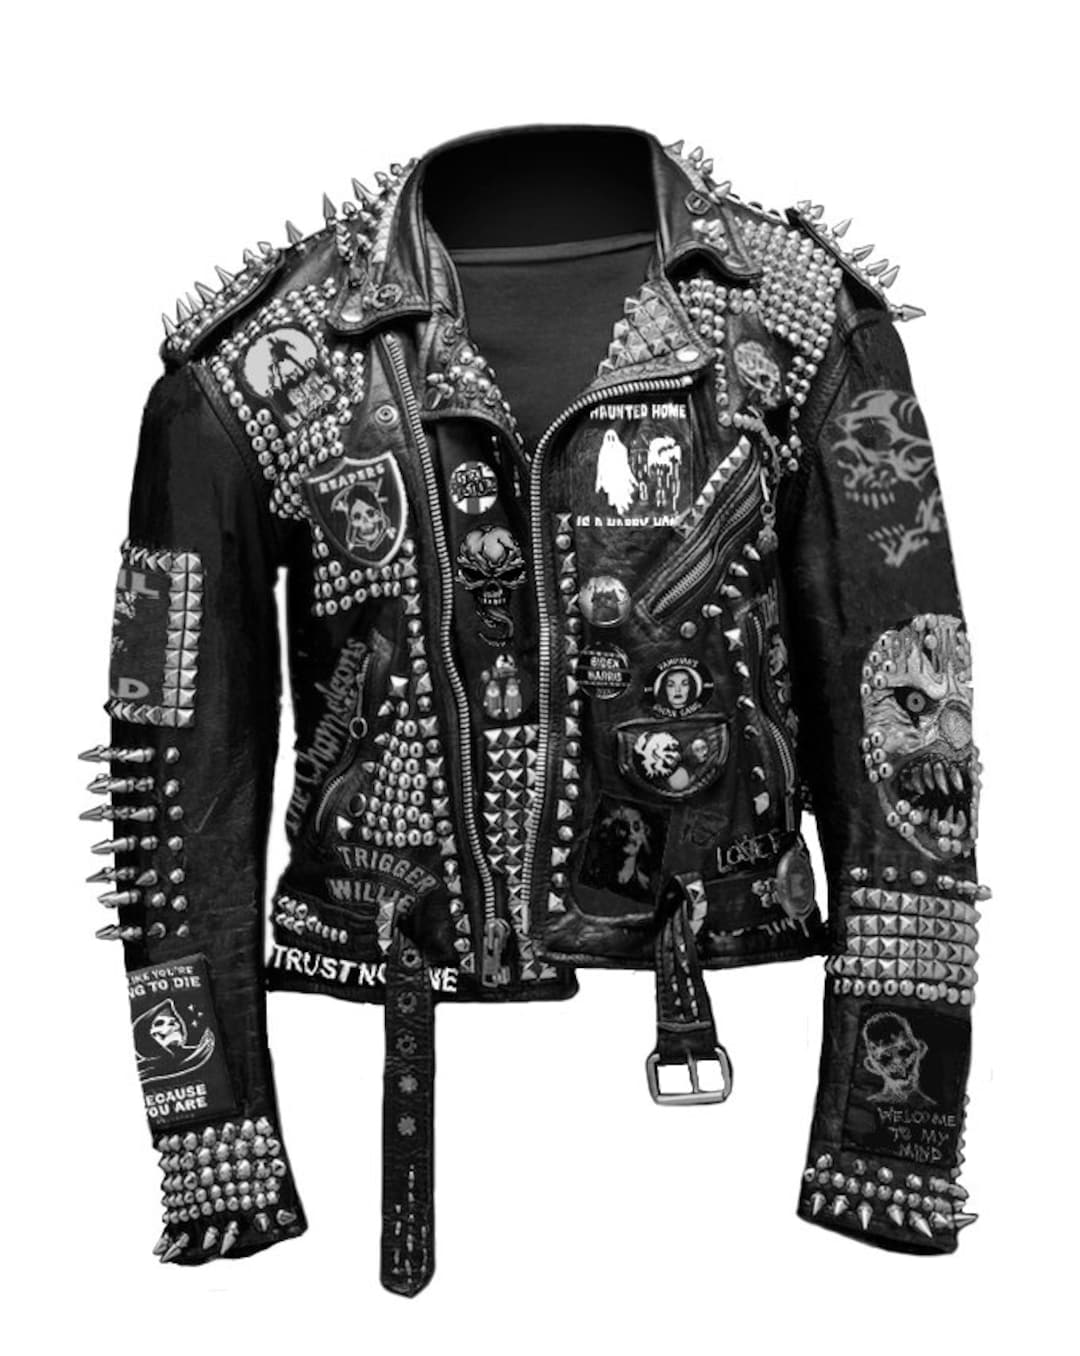 Black and White Patches Jacket Studded Genuine Leather Punk Men - Etsy